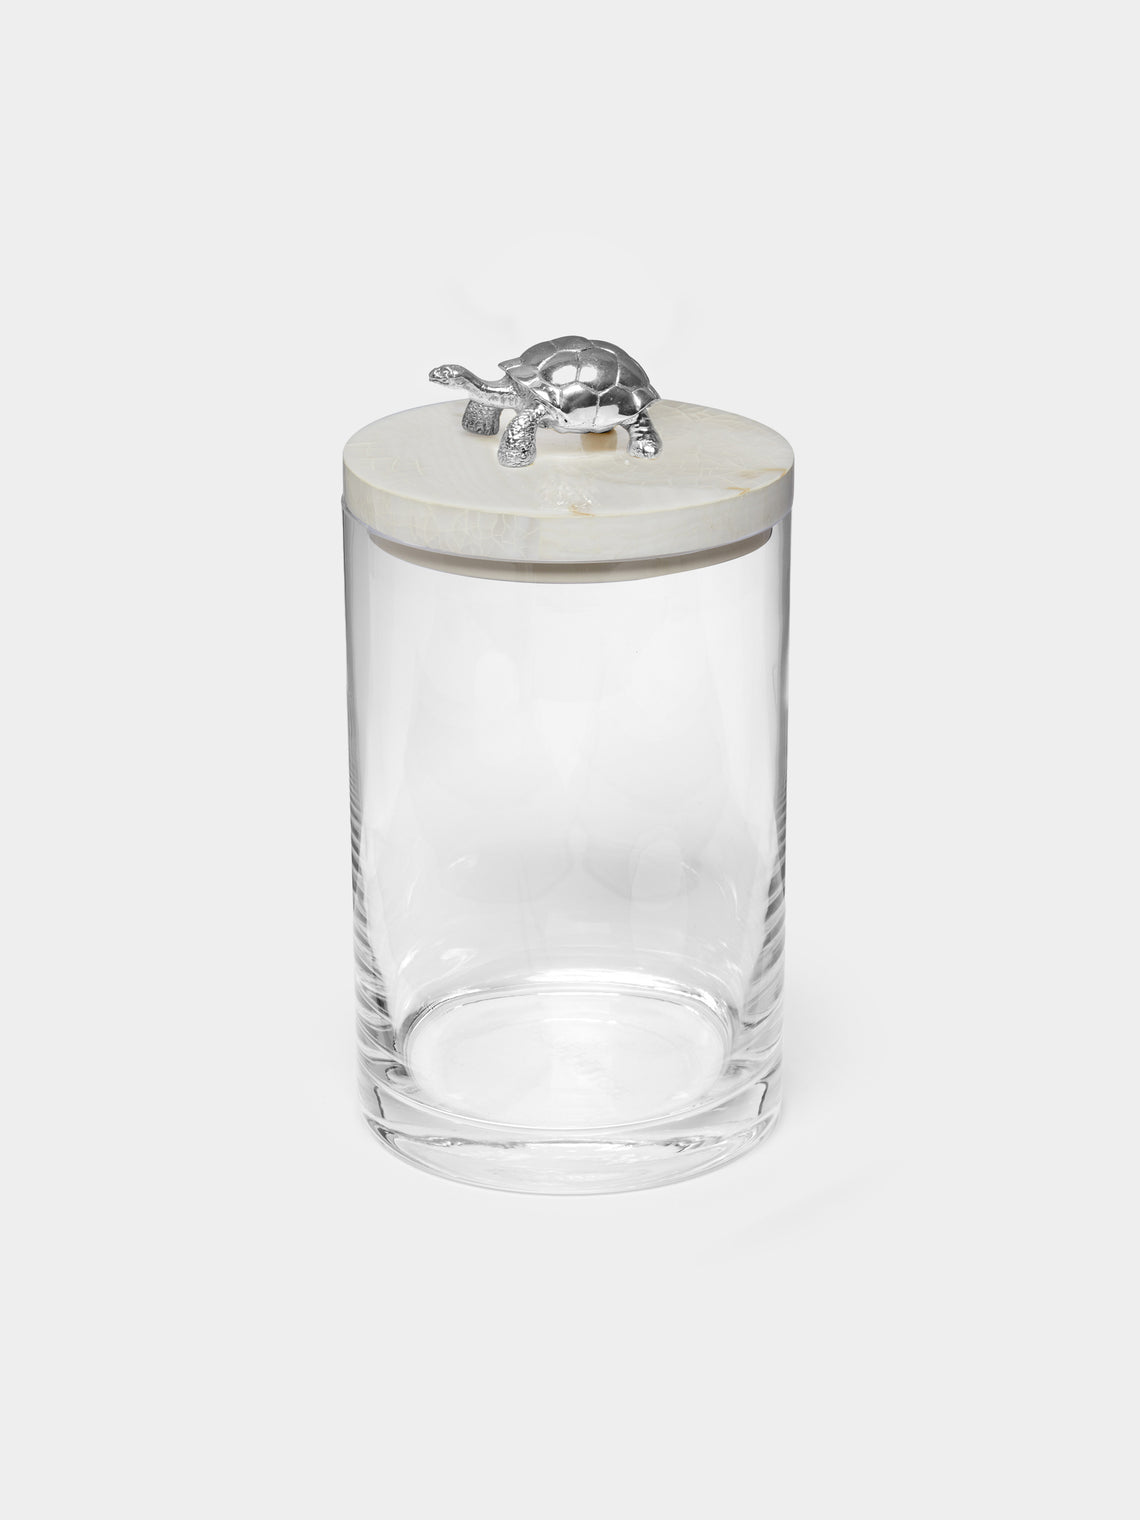 Objet Luxe - Silver-Plated, Shell and Glass Jar -  - ABASK - 